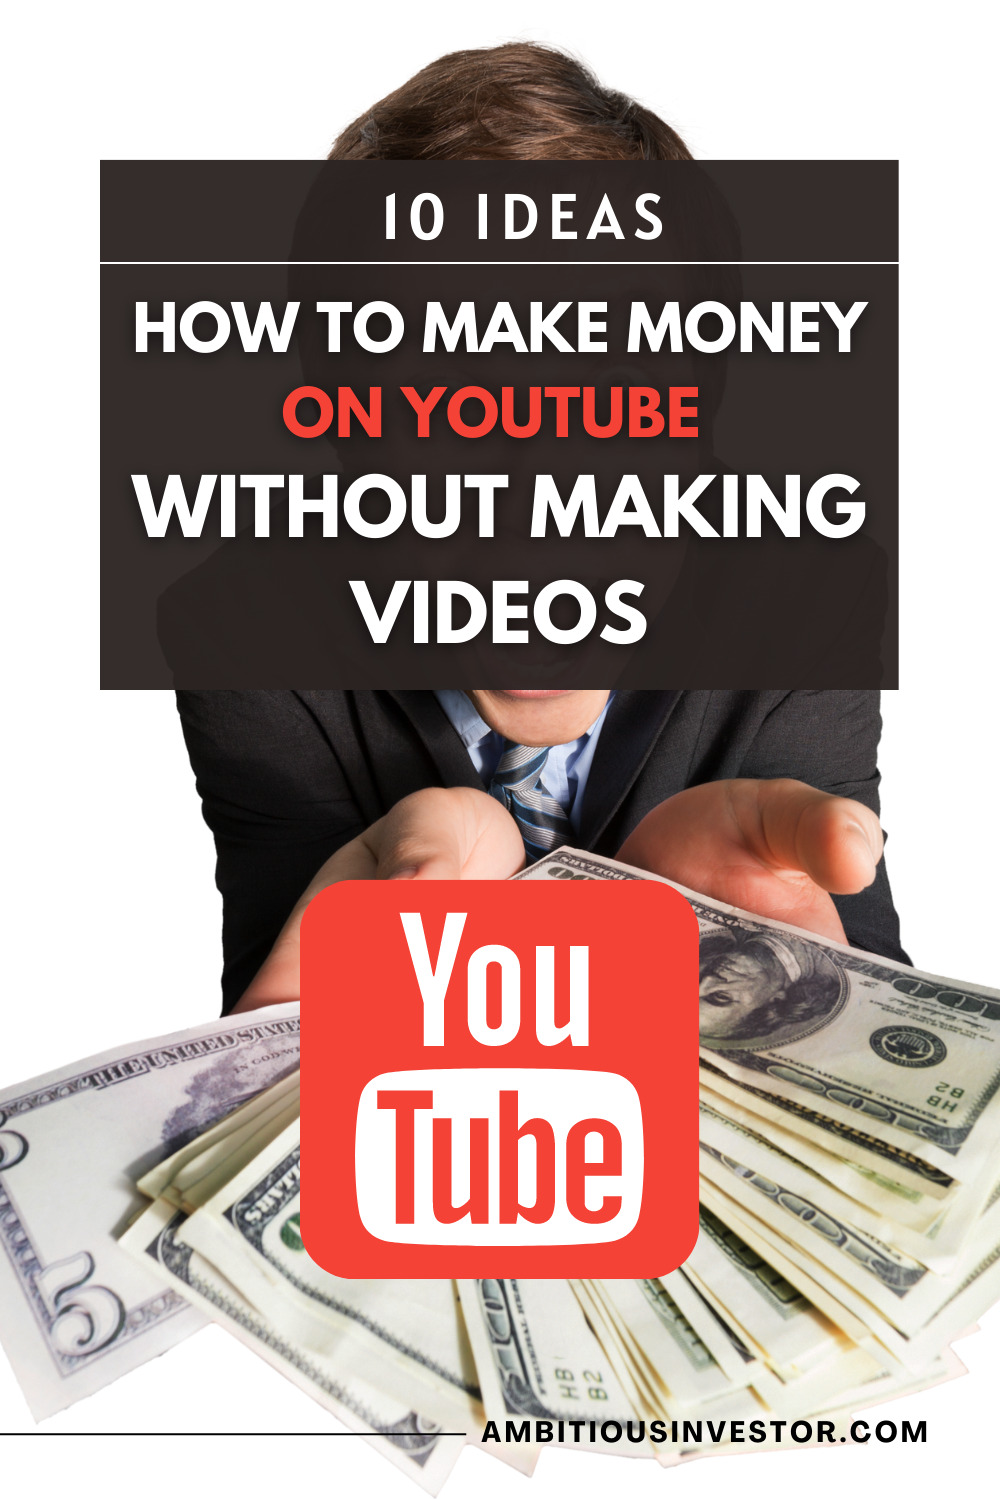 How To Make Money On Youtube Without Making Videos?